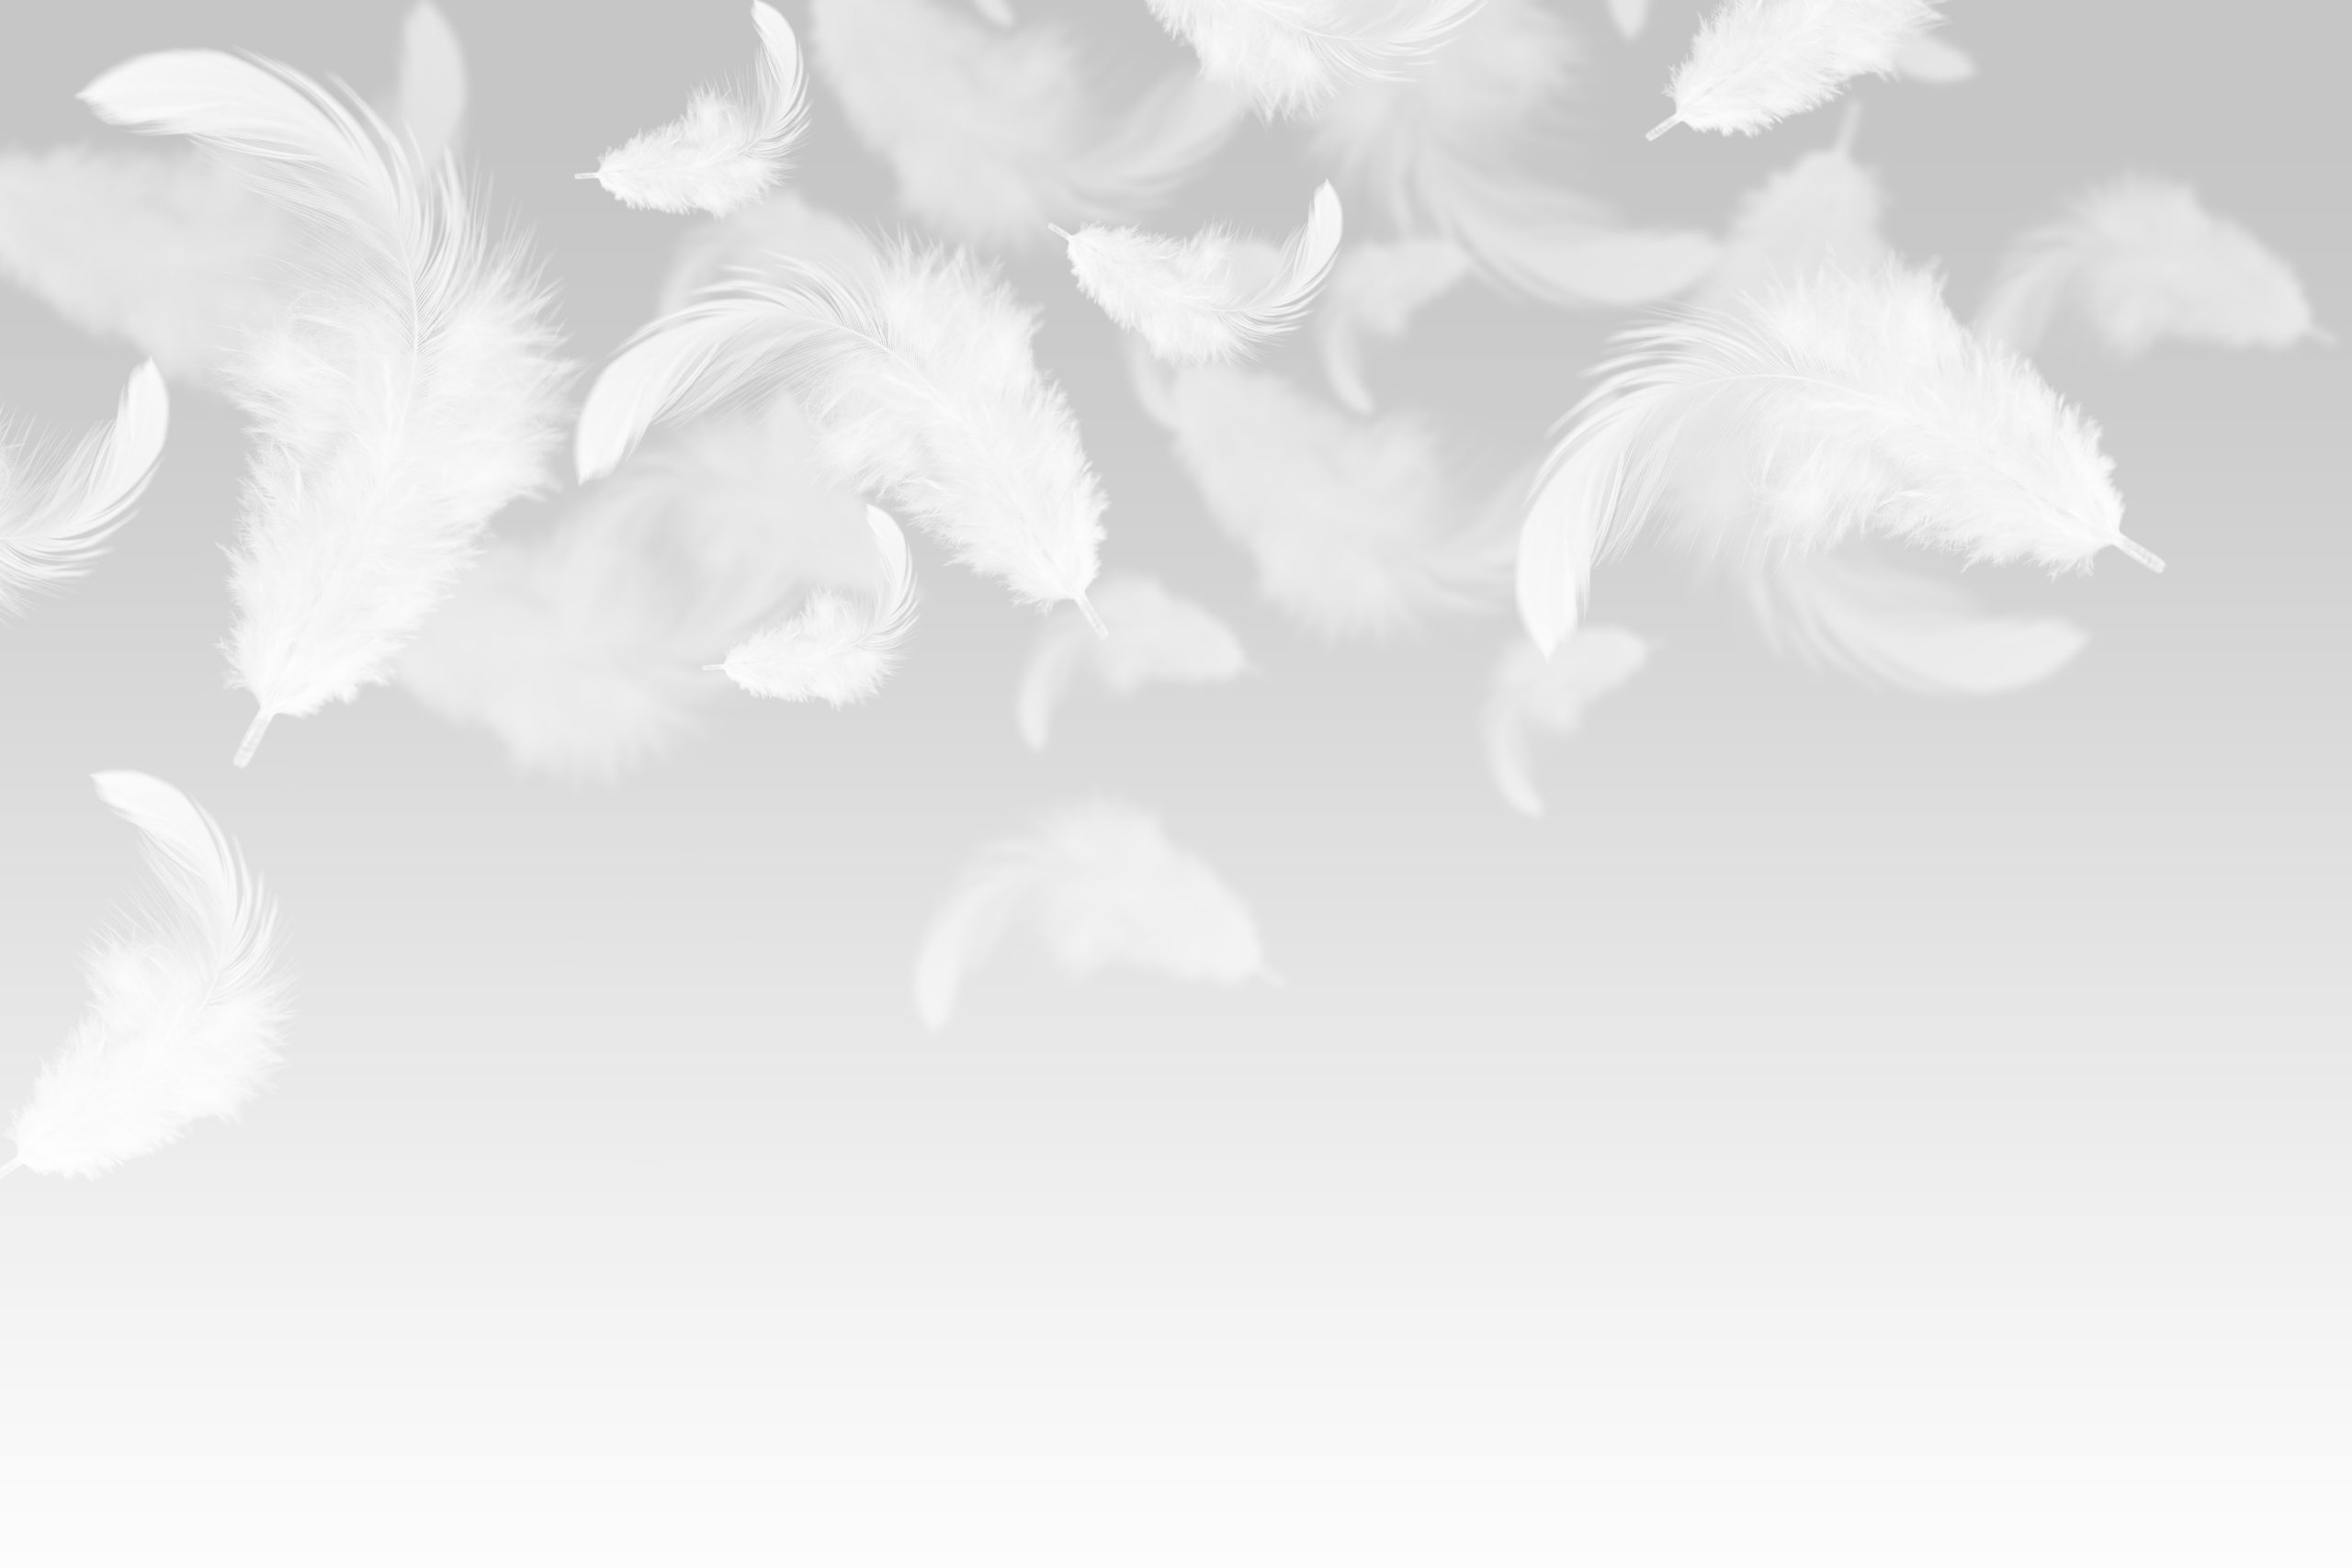 Abstract,,Soft,White,Feathers,Falling,In,The,Air.